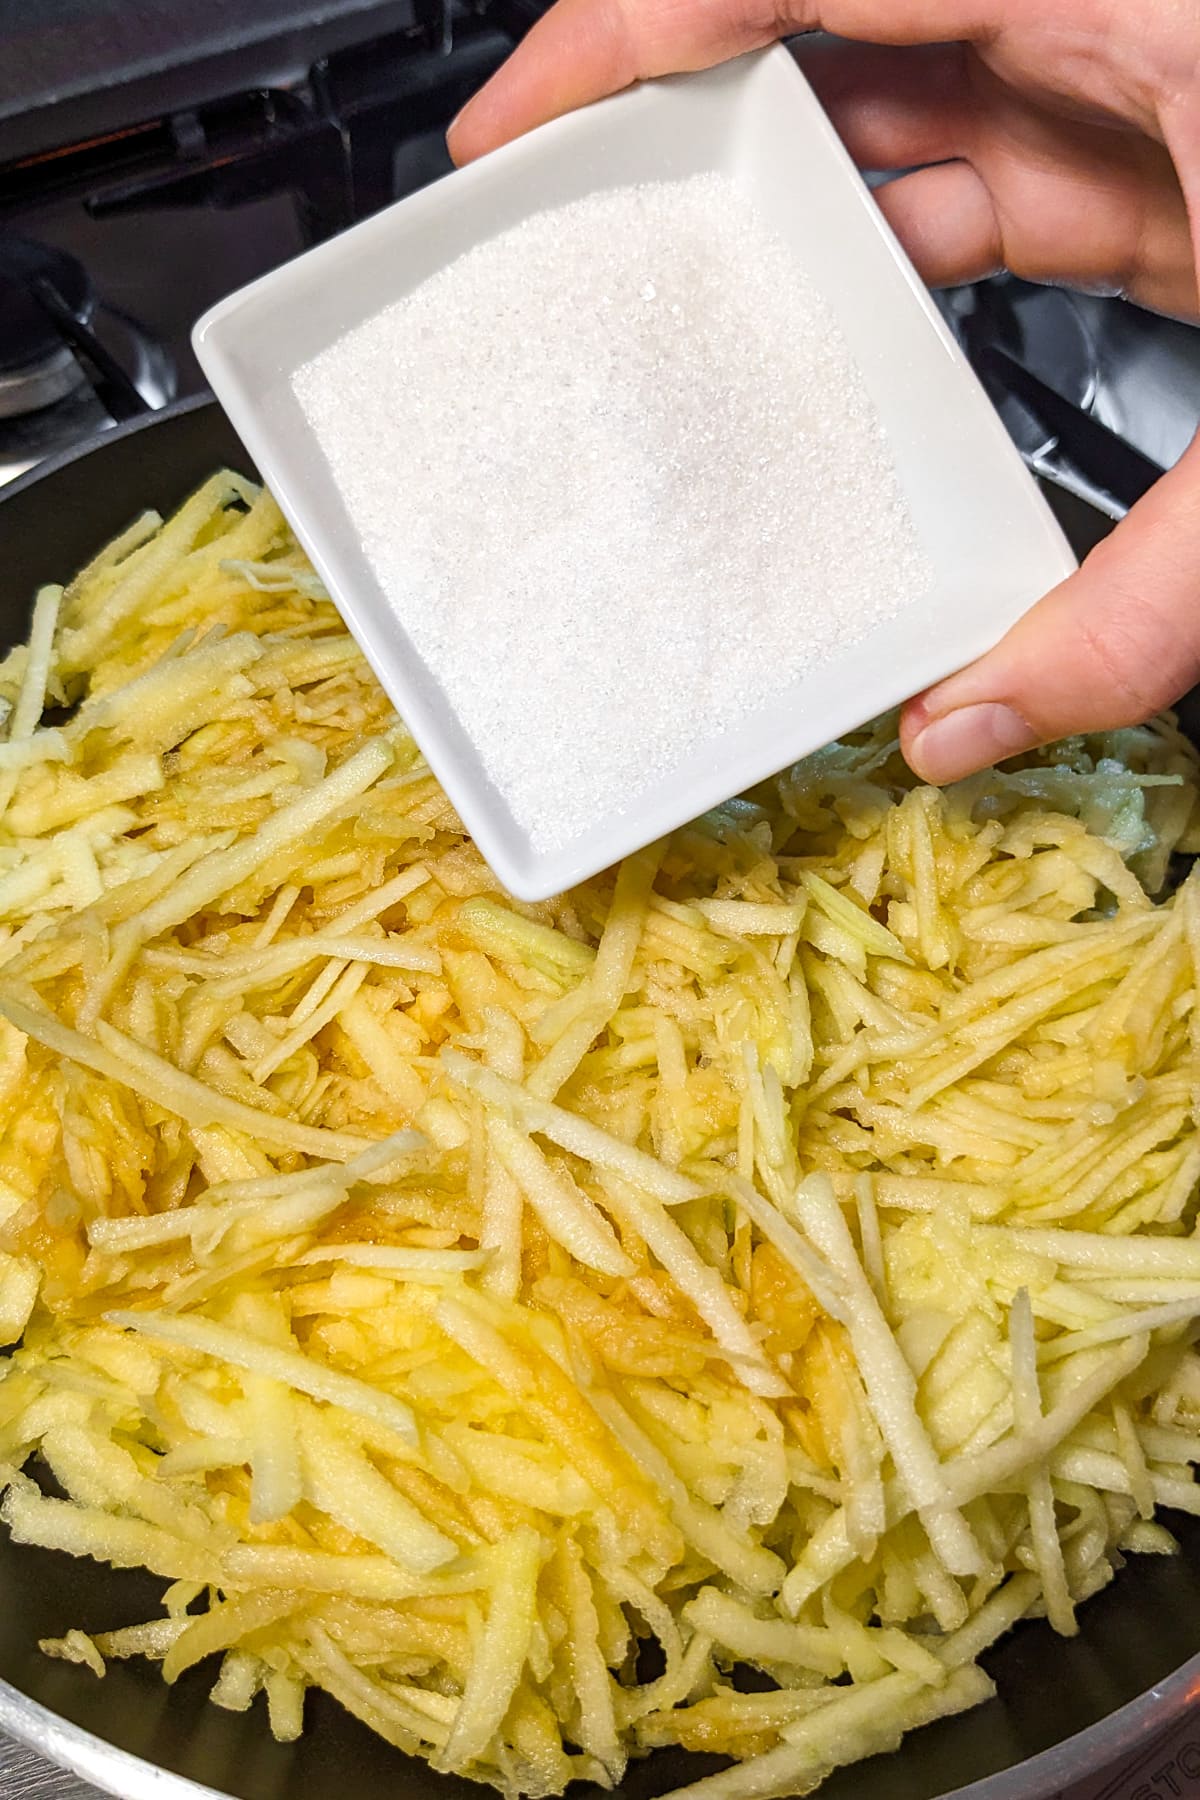 Adding sugar over a frying pan with grated apples.